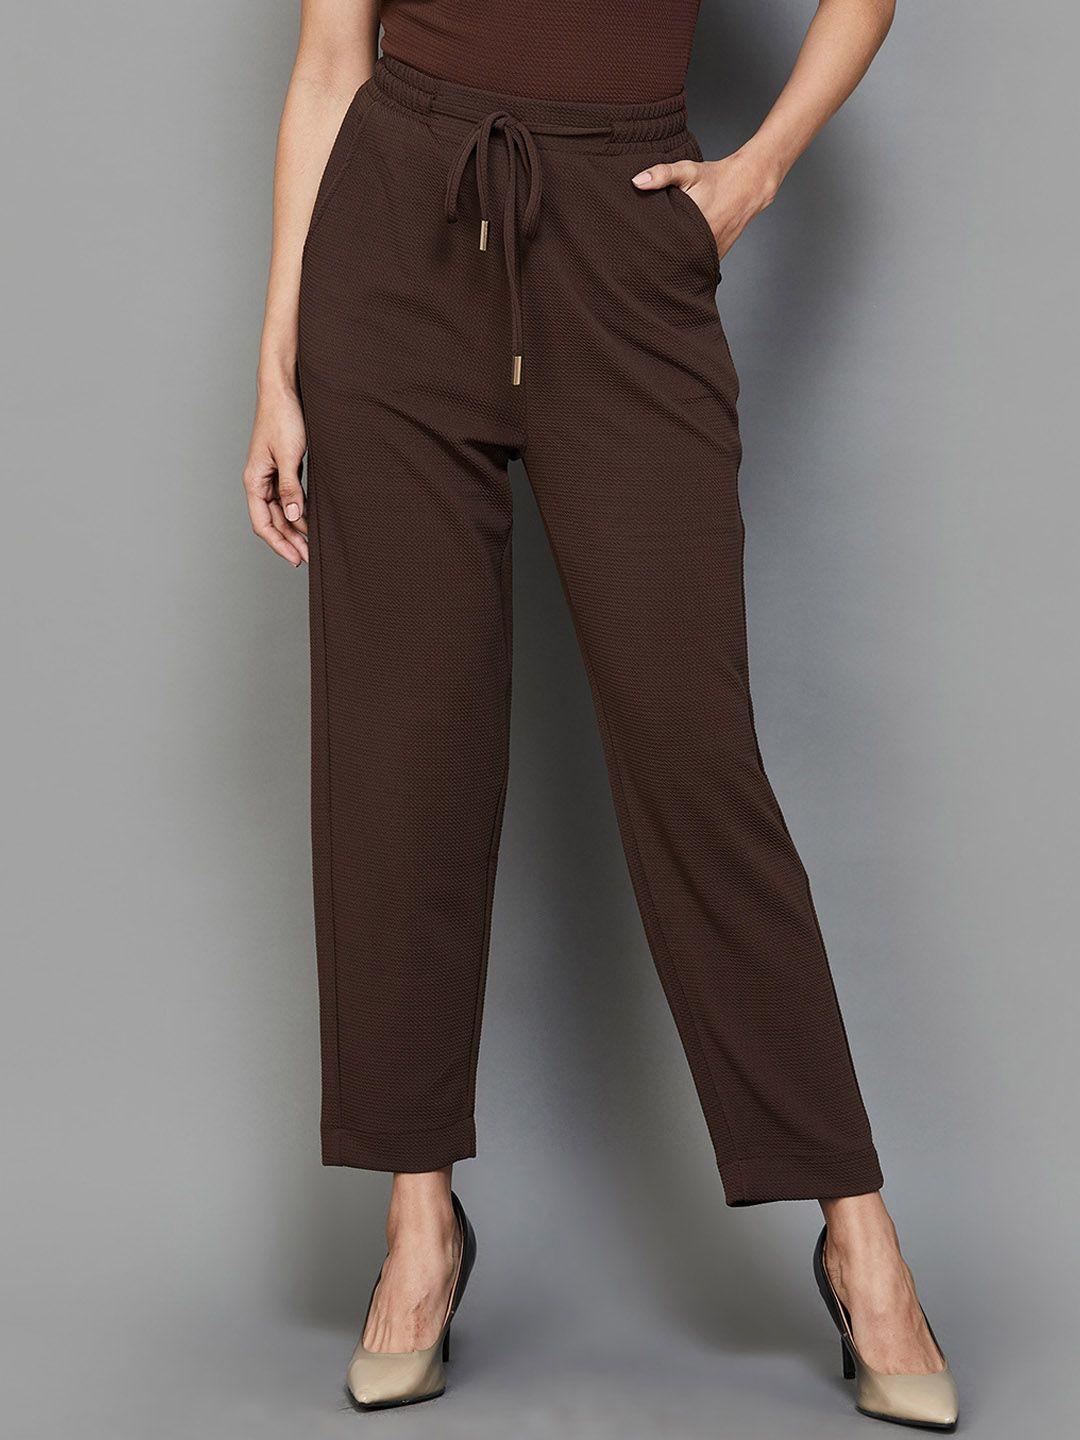 code by lifestyle women mid-rise textured trouser